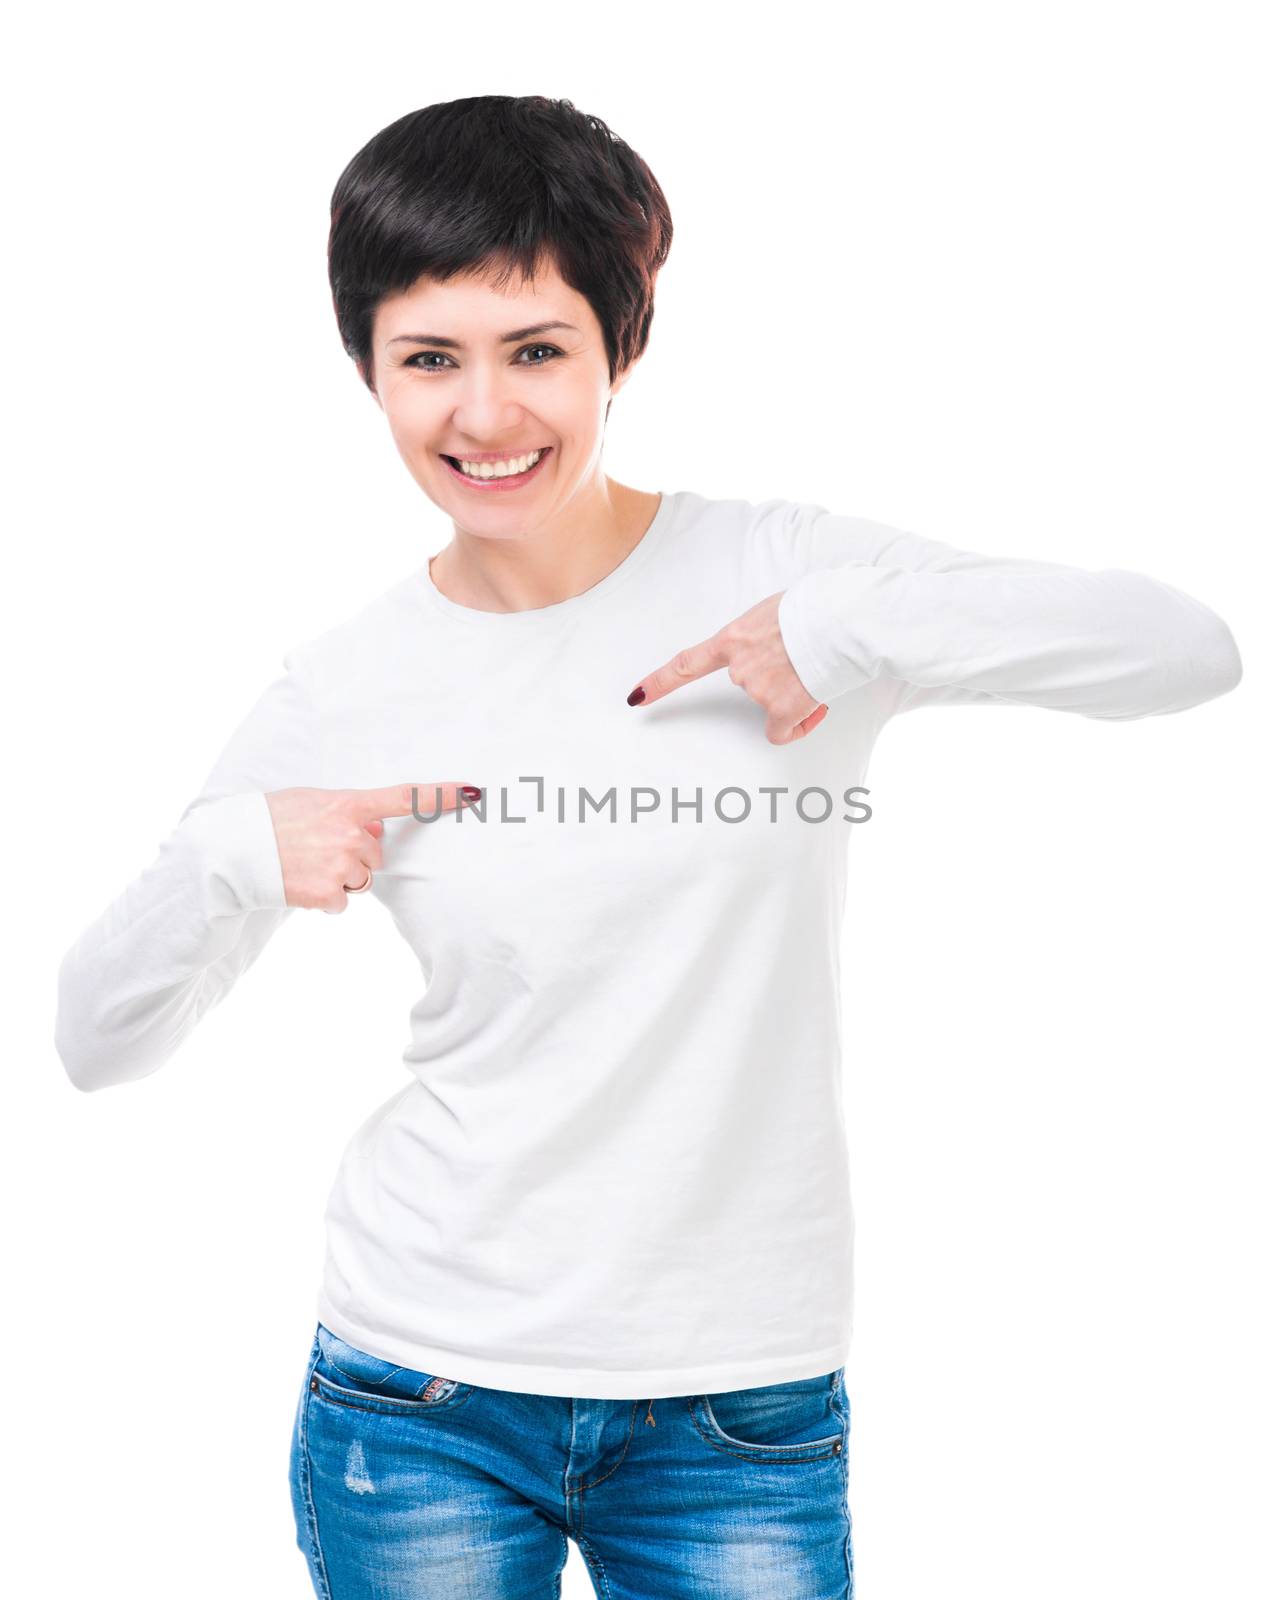 Shorthair woman showing a thumbs up on her blouse. Isolated on white